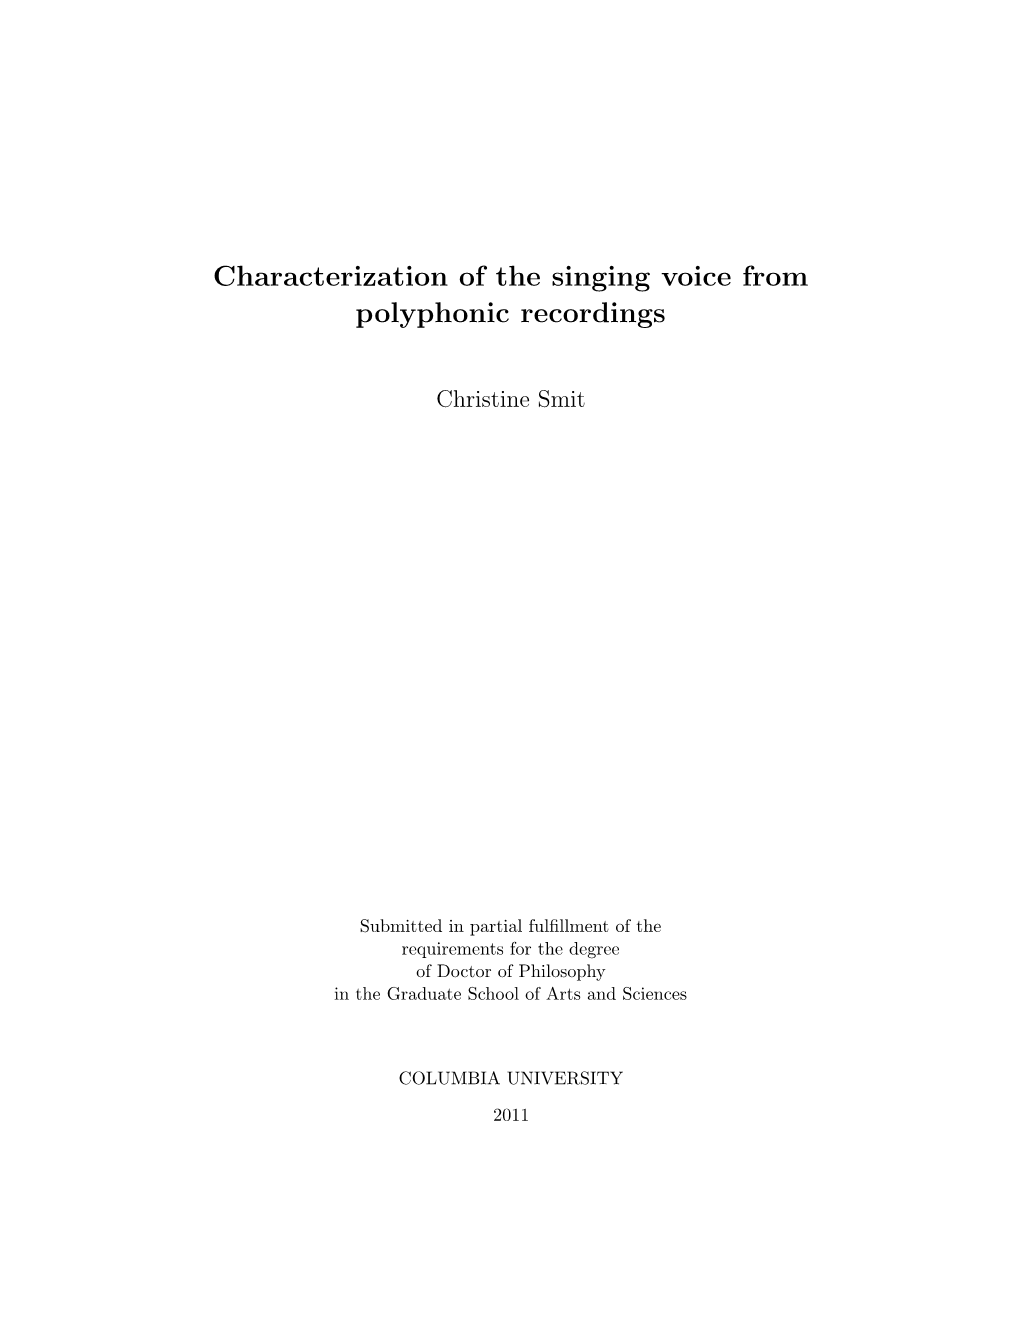 Characterization of the Singing Voice from Polyphonic Recordings